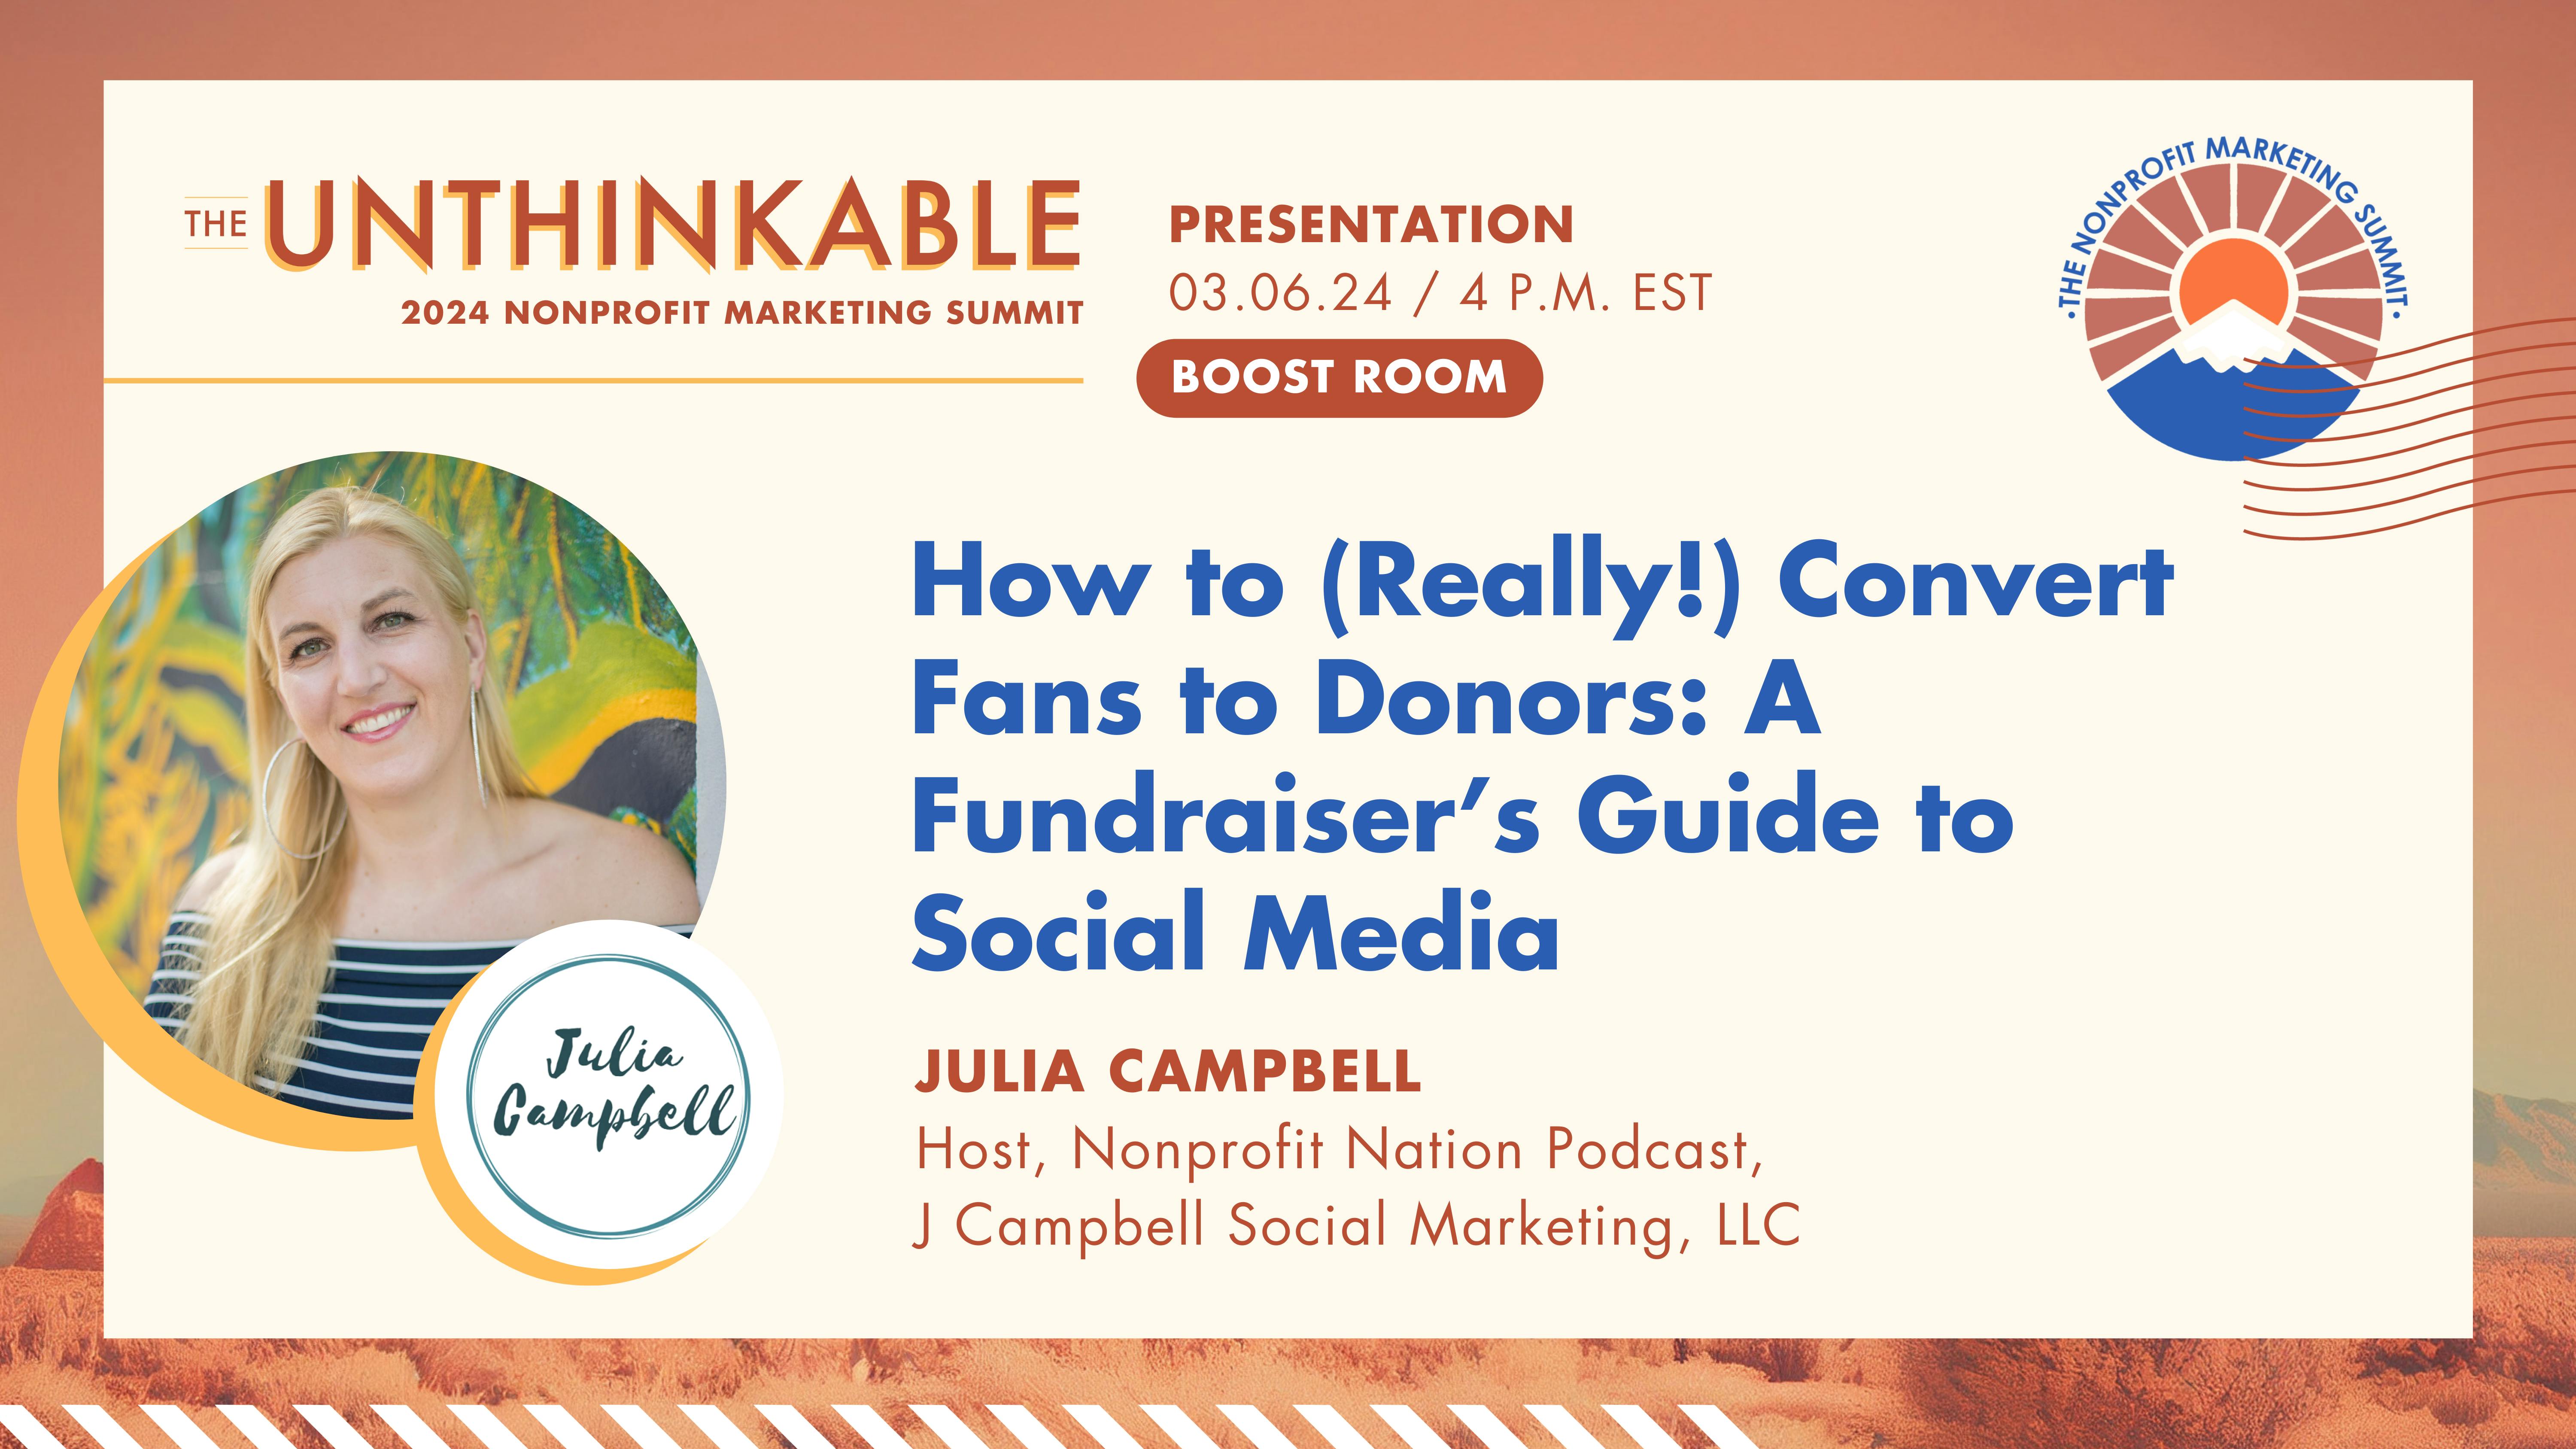 Join me for my session How to (Really!) Convert Social Media Fans to Donors